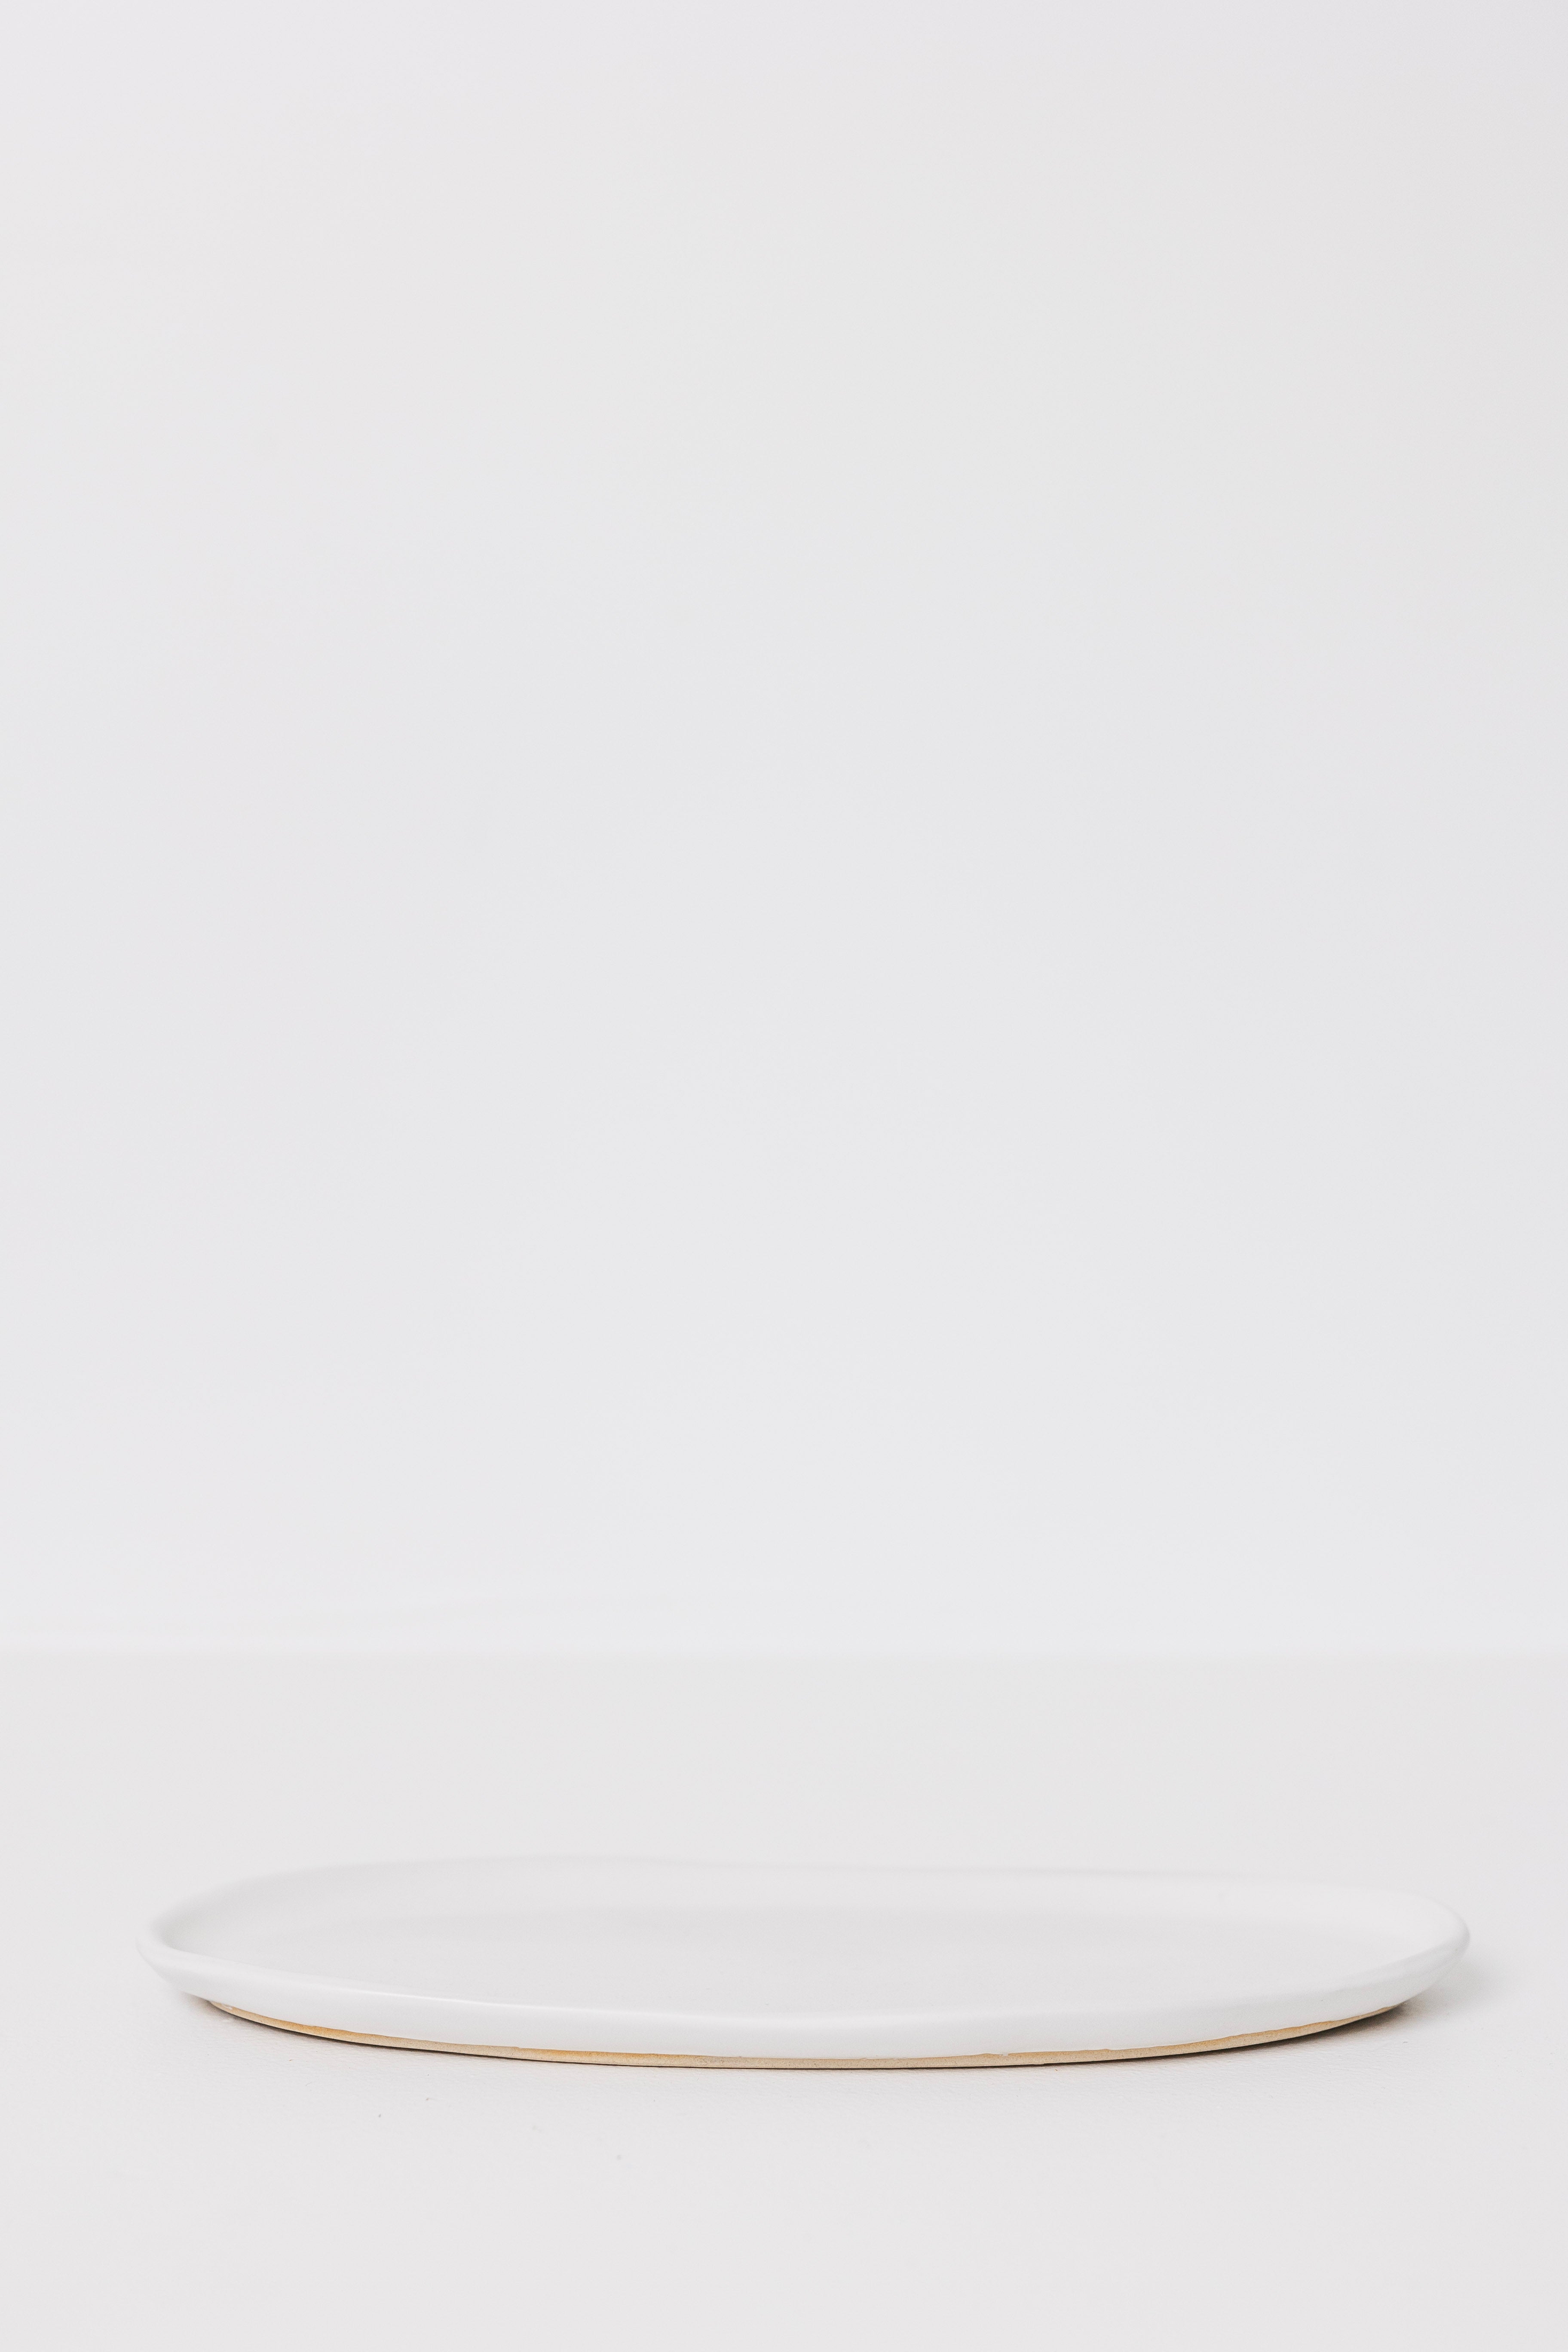 Ines Small Oval Lipped Serving Plate - Matte White - 12 inch